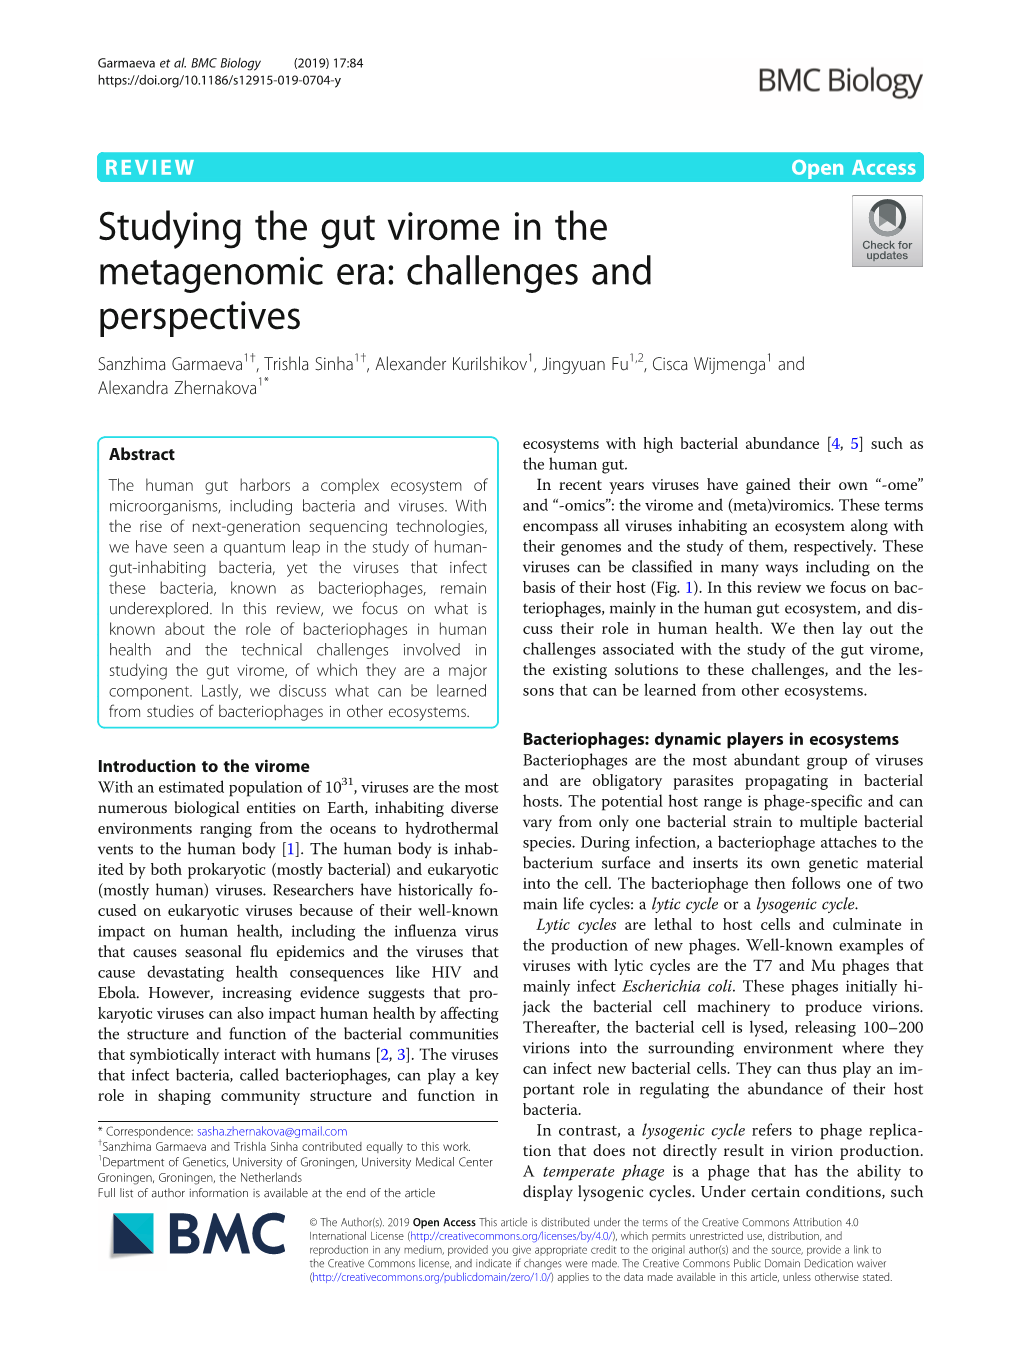 Studying the Gut Virome in the Metagenomic